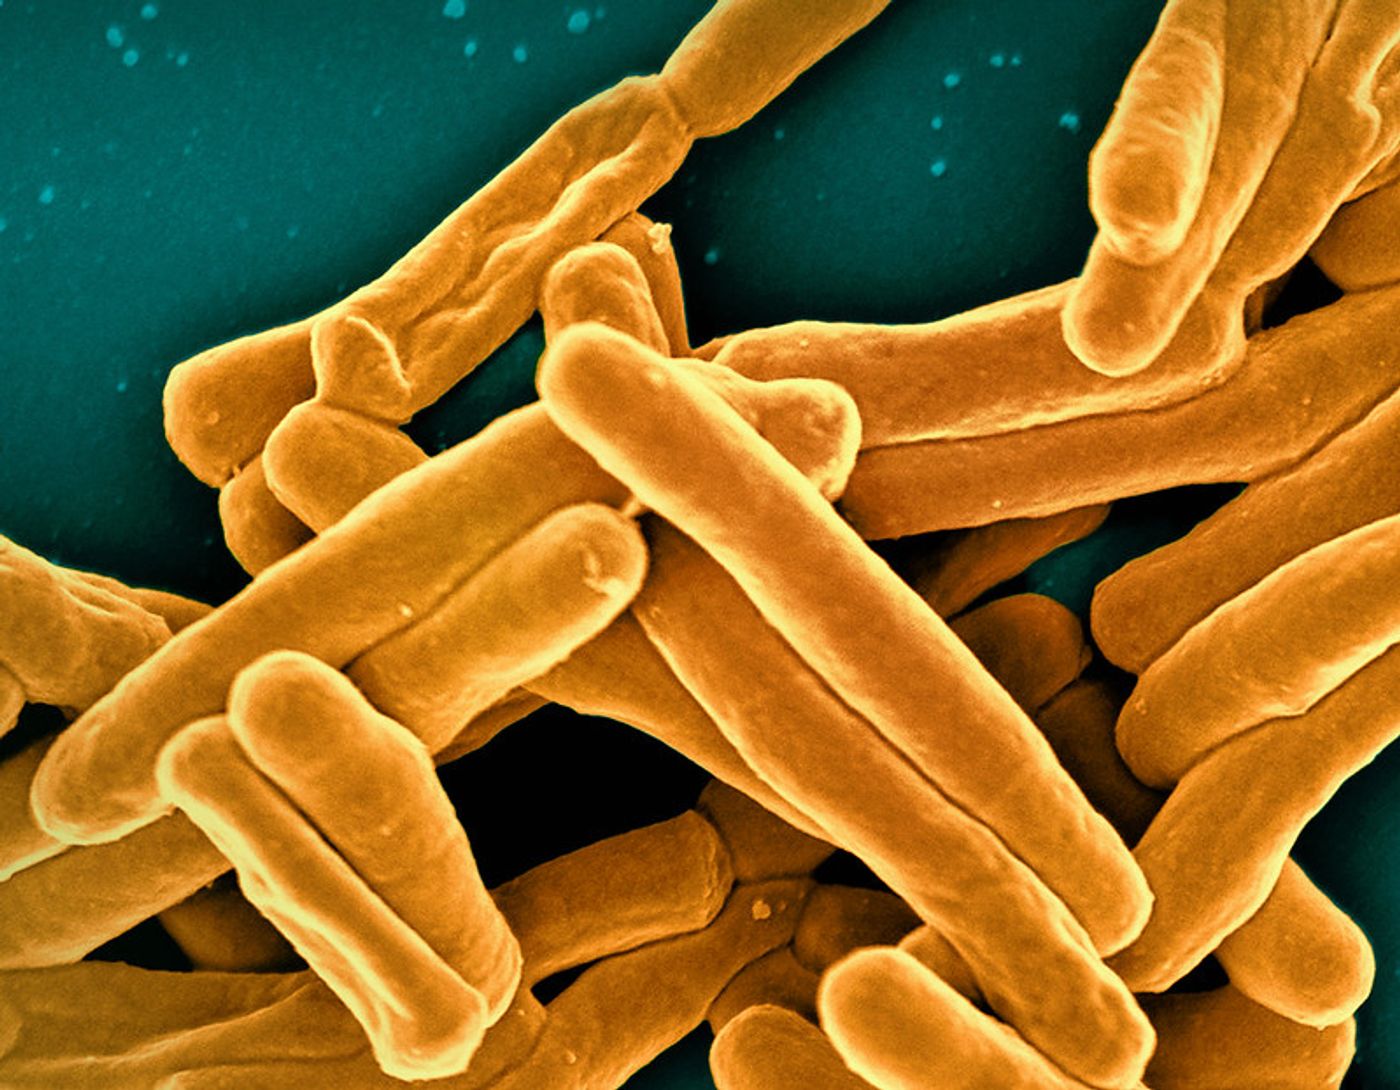 Scanning electron micrograph of Mycobacterium tuberculosis particles (colorized gold), the bacterium which causes TB. Credit: NIAID